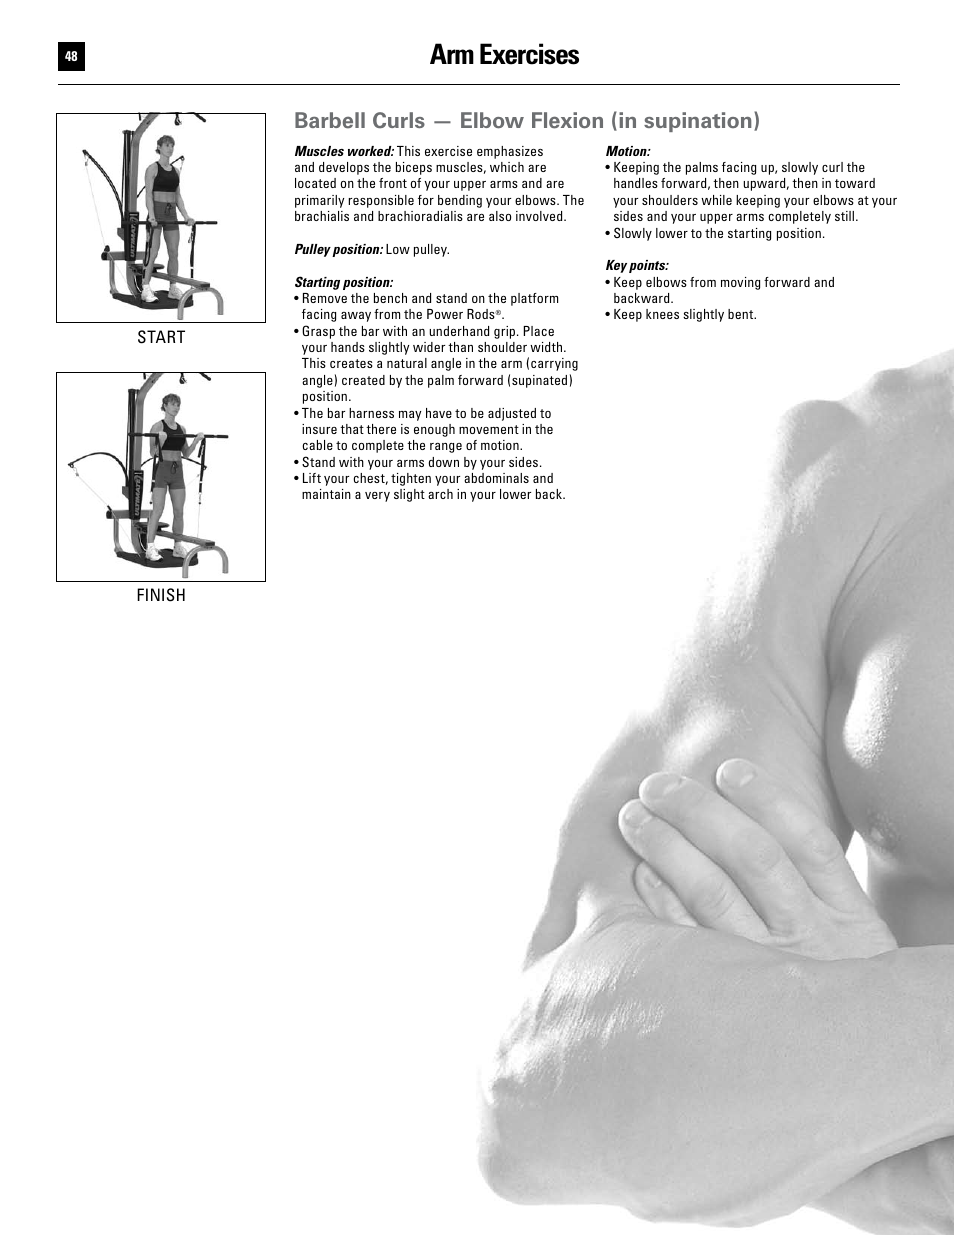 Arm exercises, Barbell curls — elbow flexion (in supination) | Bowflex Ultimate User Manual | Page 48 / 110